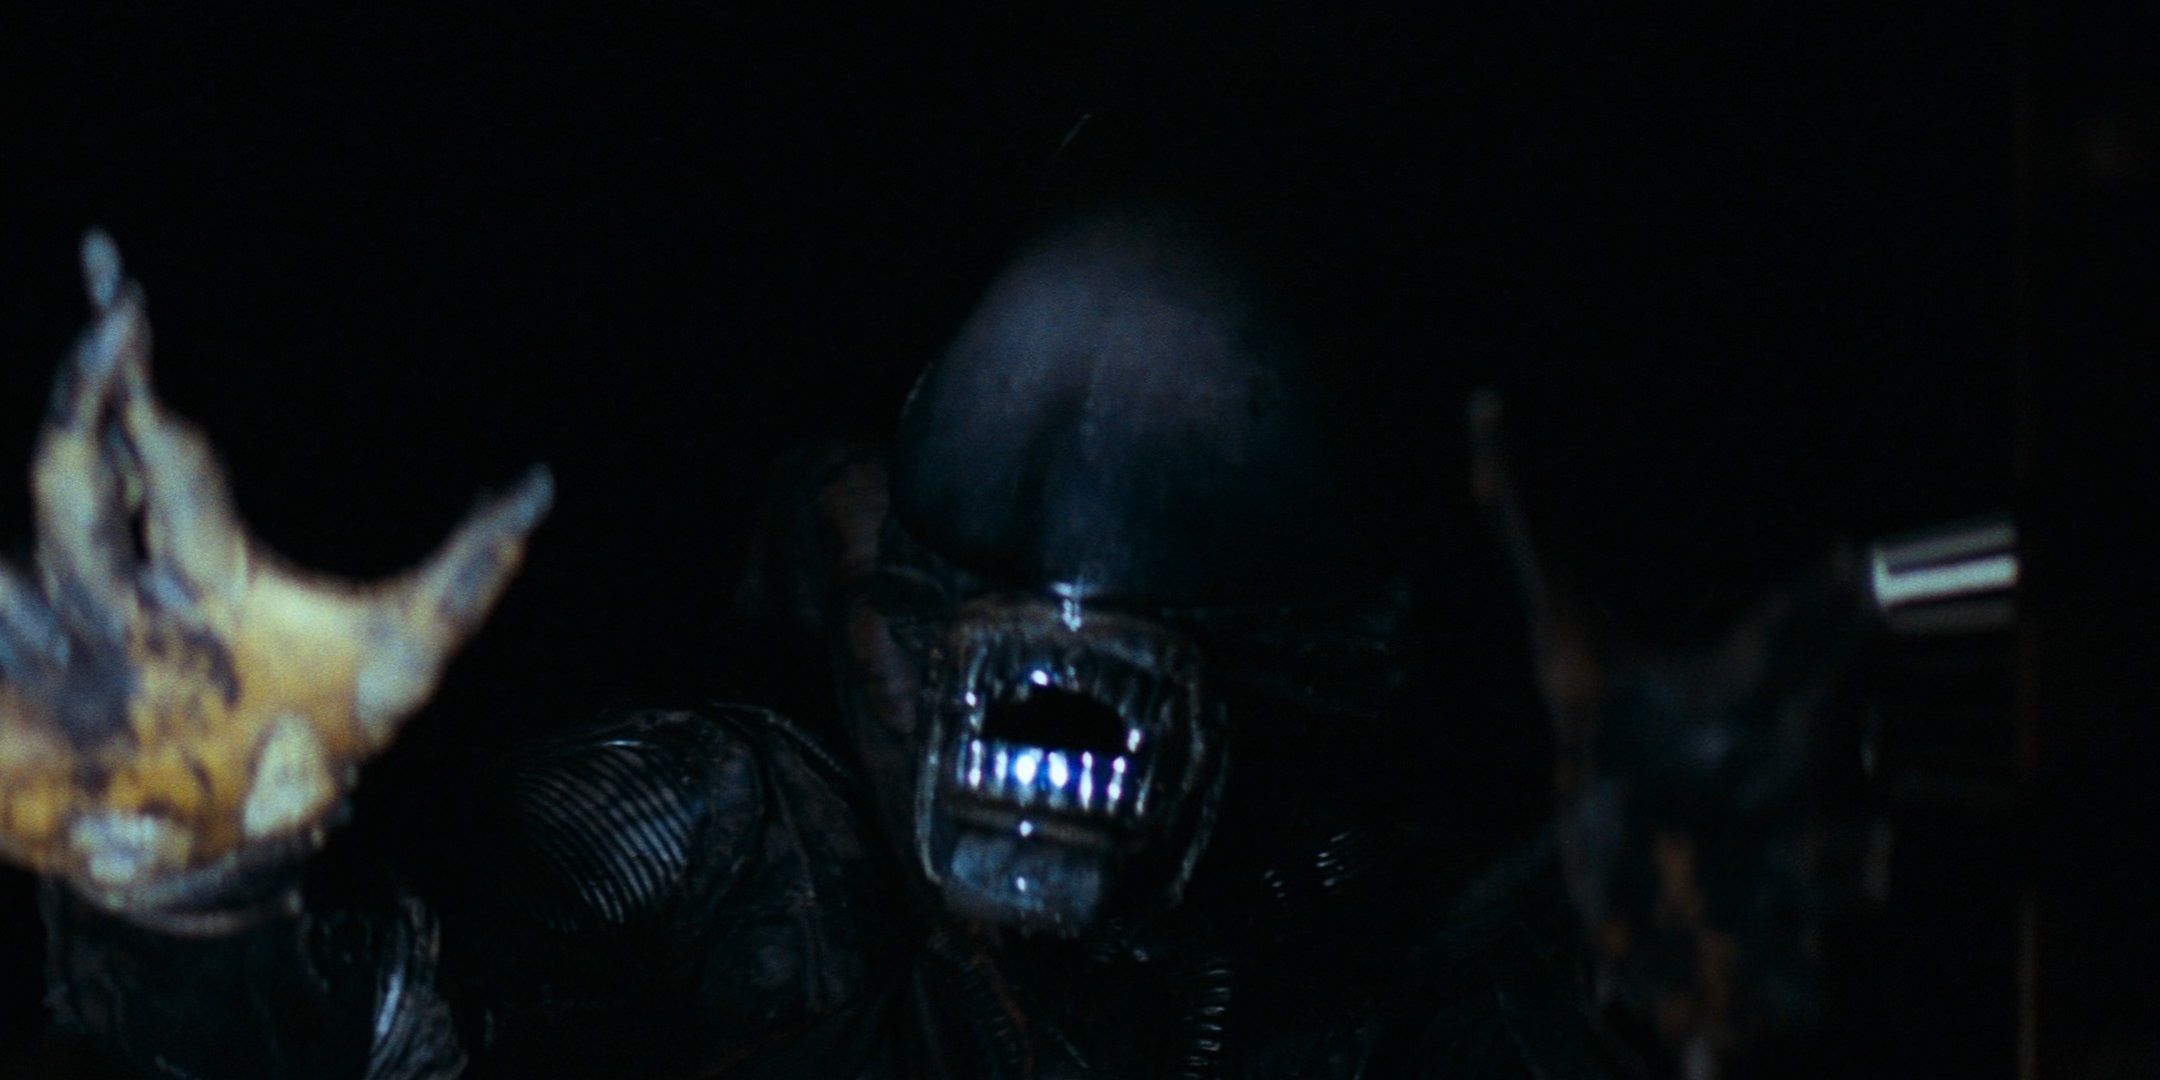 The xenomorph in Alien doing a jumpscare